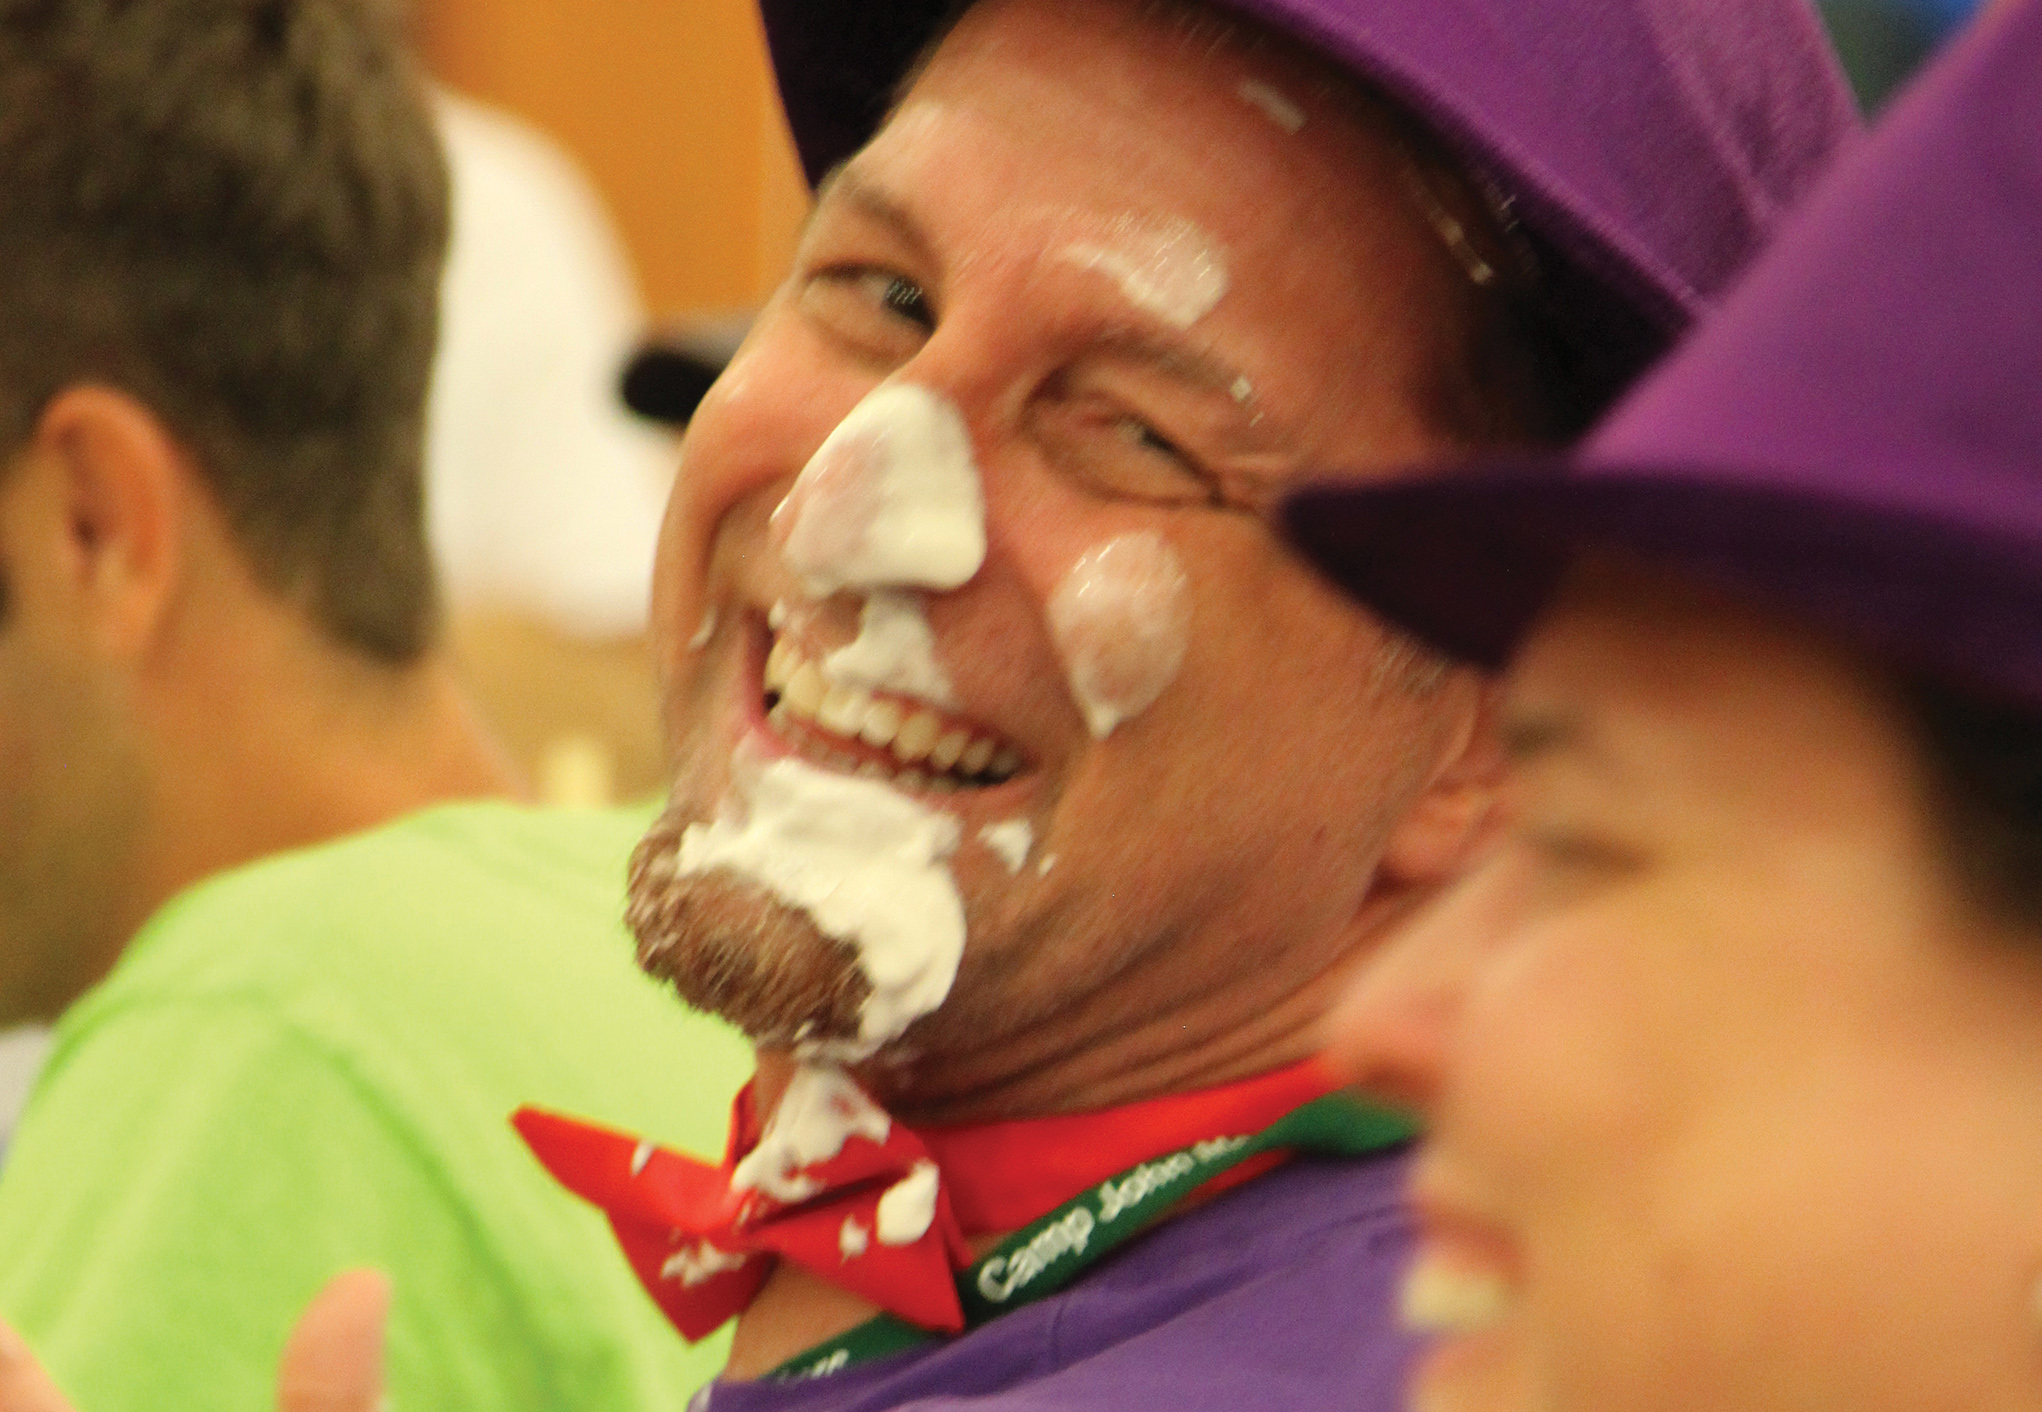 A man with a purple hat and white face paint.